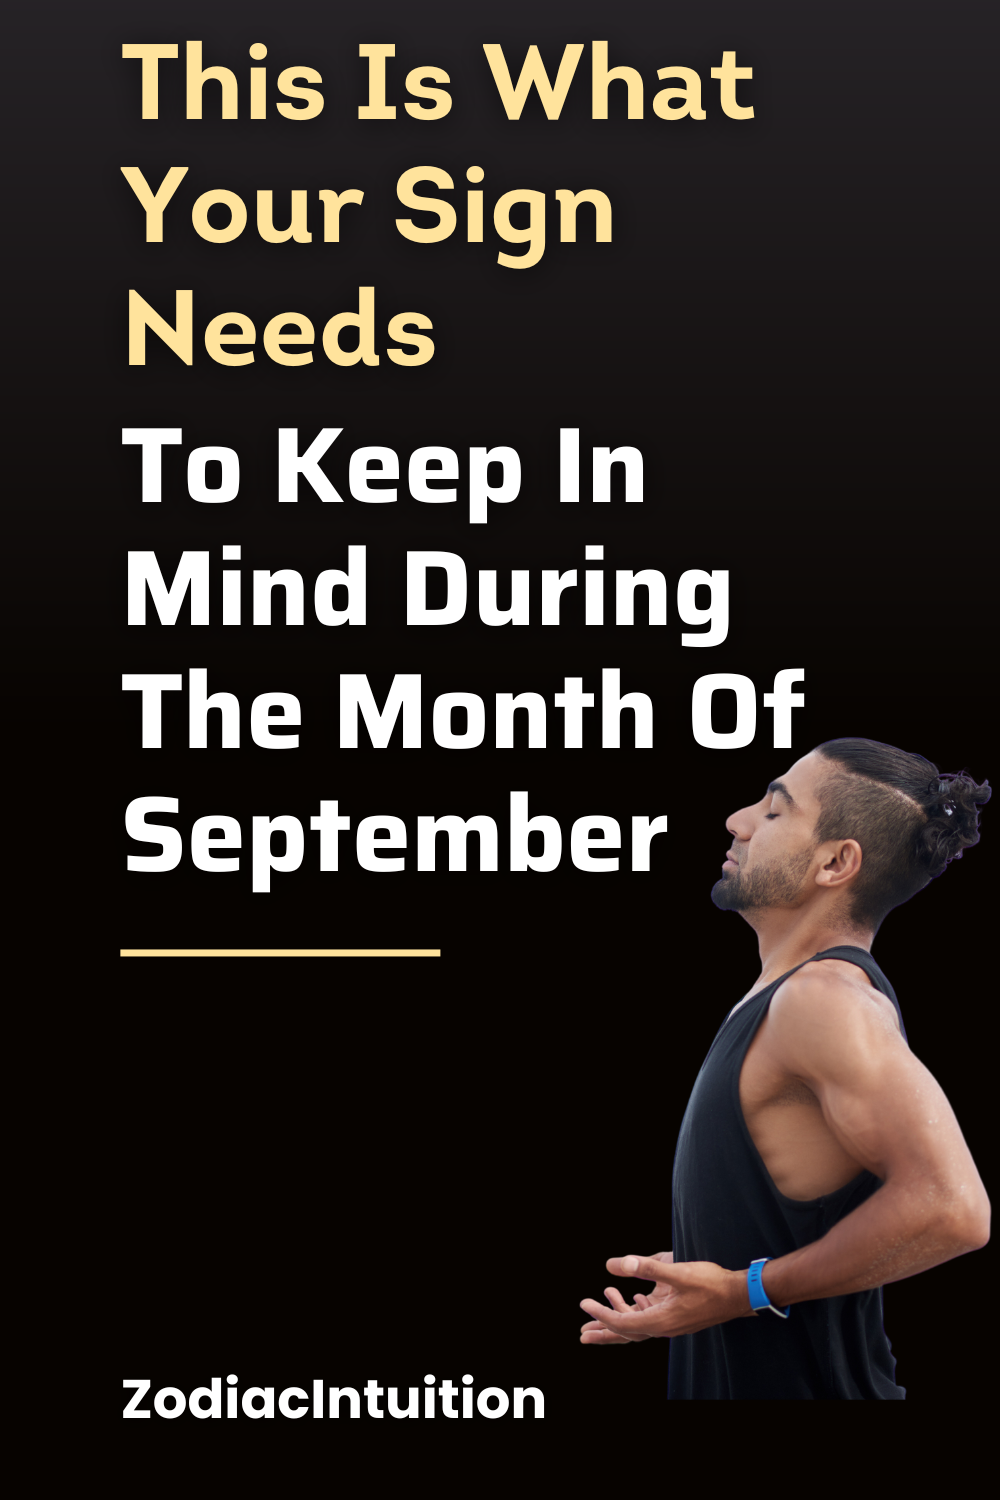 This Is What Your Sign Needs To Keep In Mind During The Month Of September